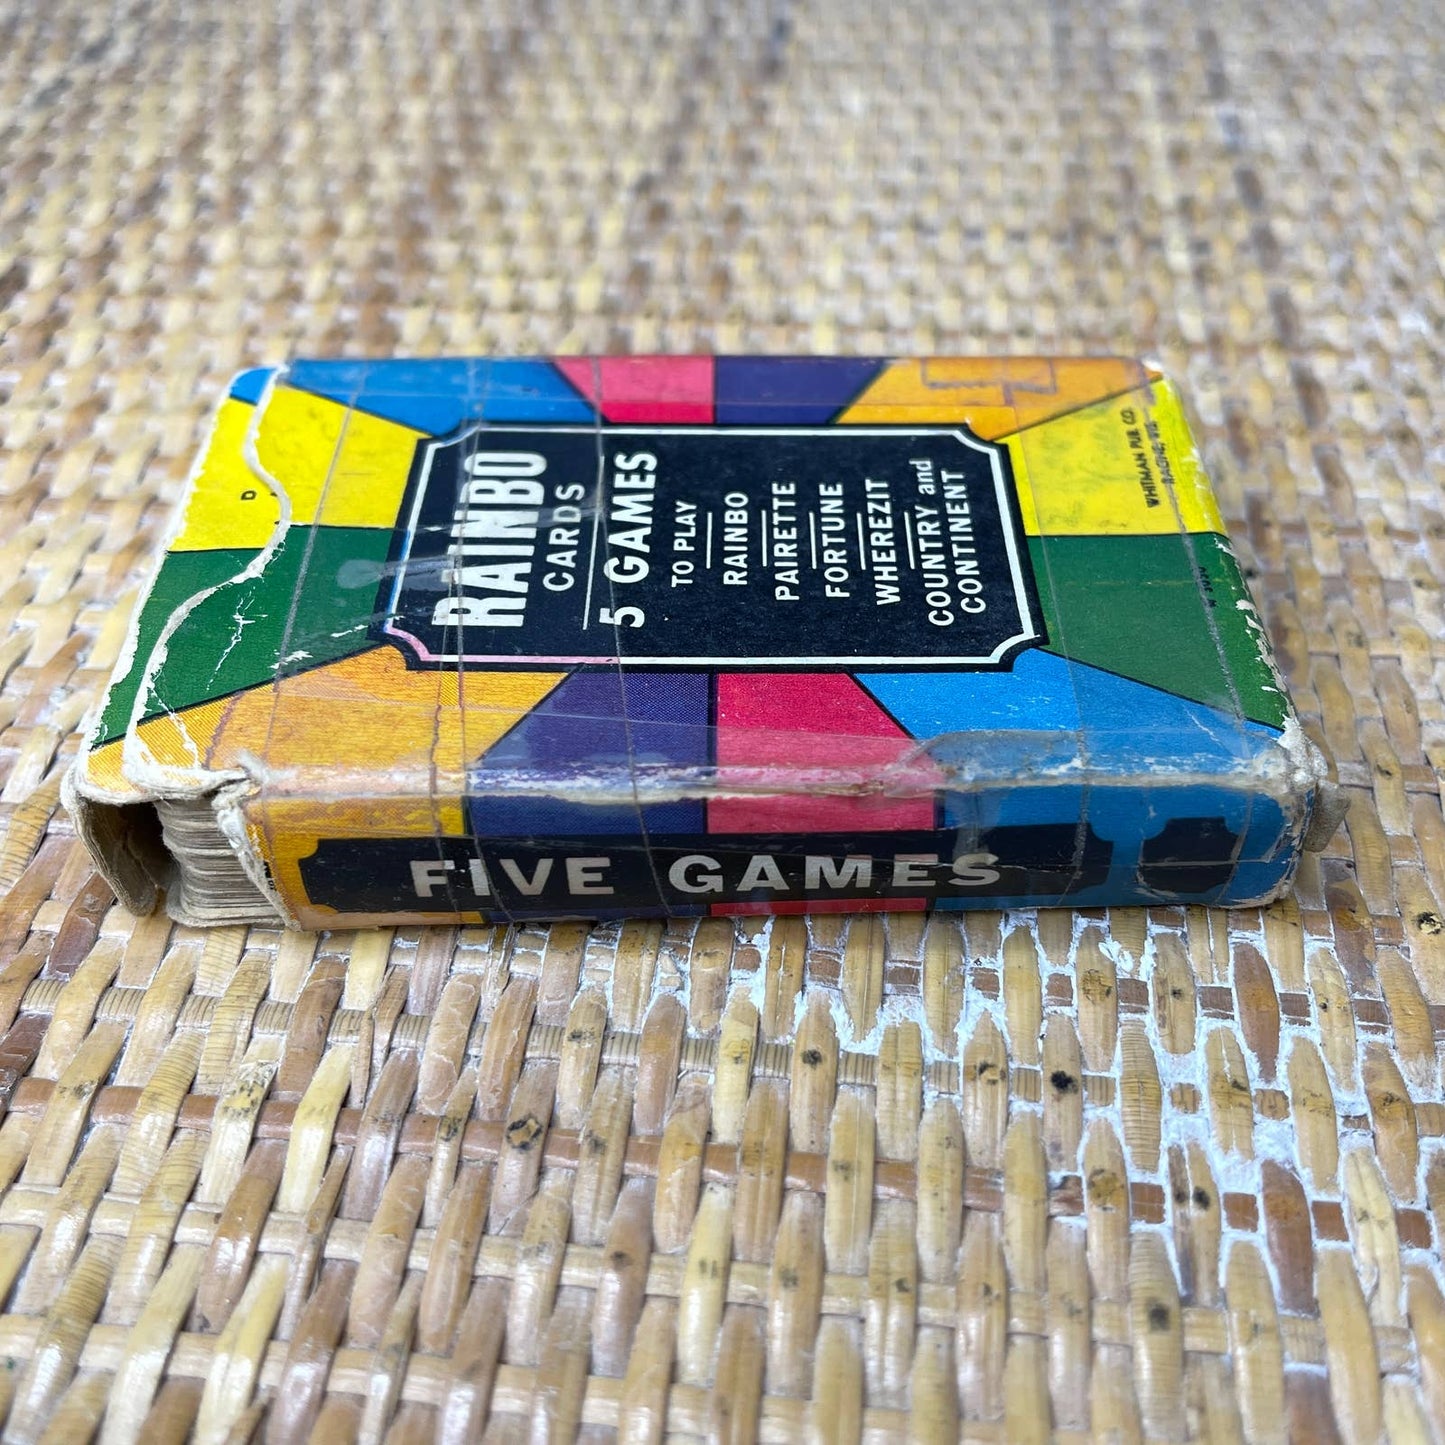 Vintage 1930s Rainbo Cards Deck with 5 games Including Fortune Telling